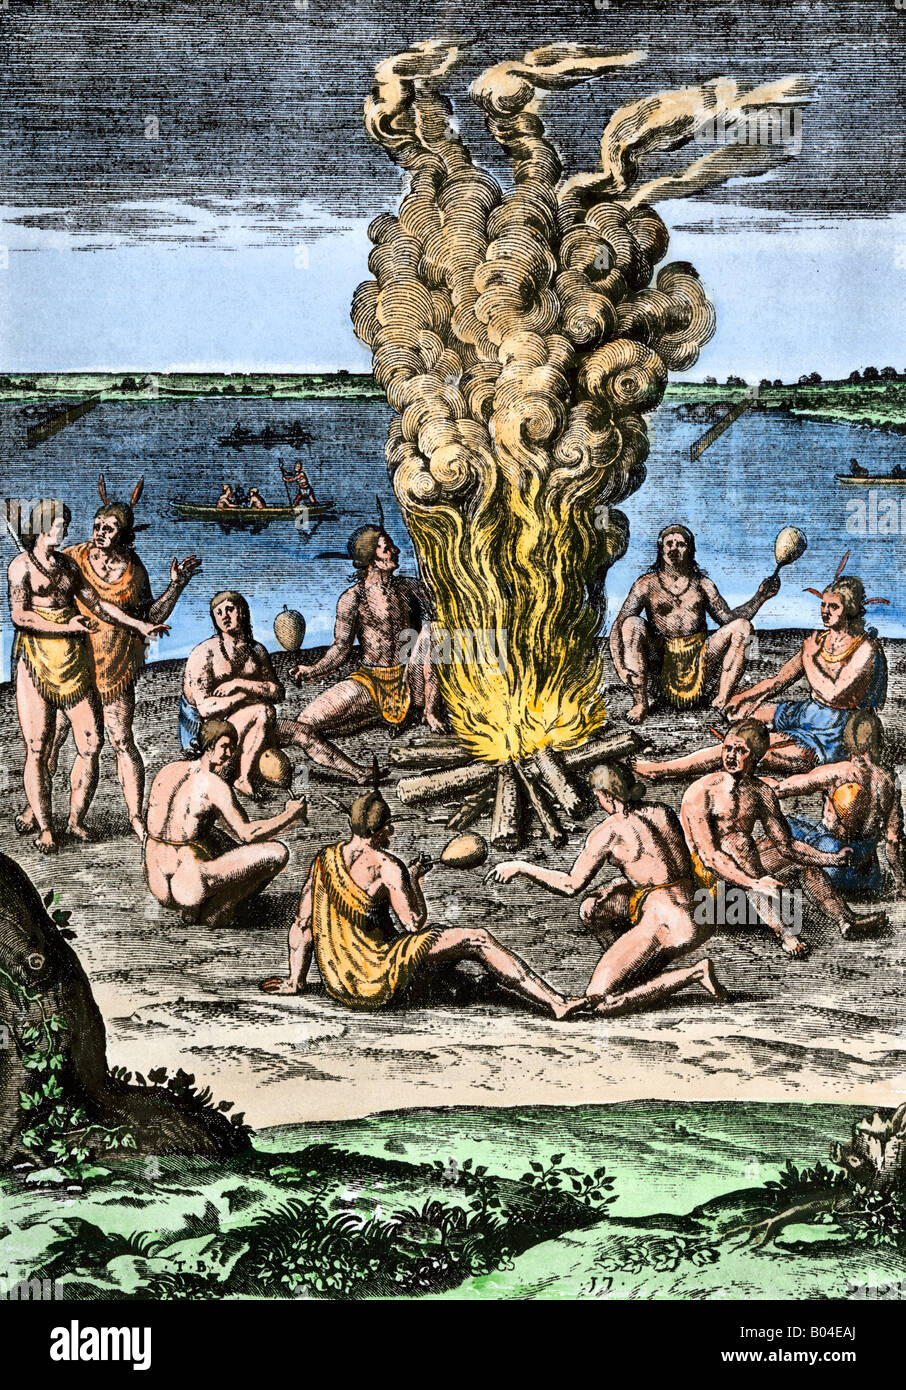 Native Americans around a fire on the Virginia North Carolina coast 1500s. Hand-colored woodcut Stock Photo